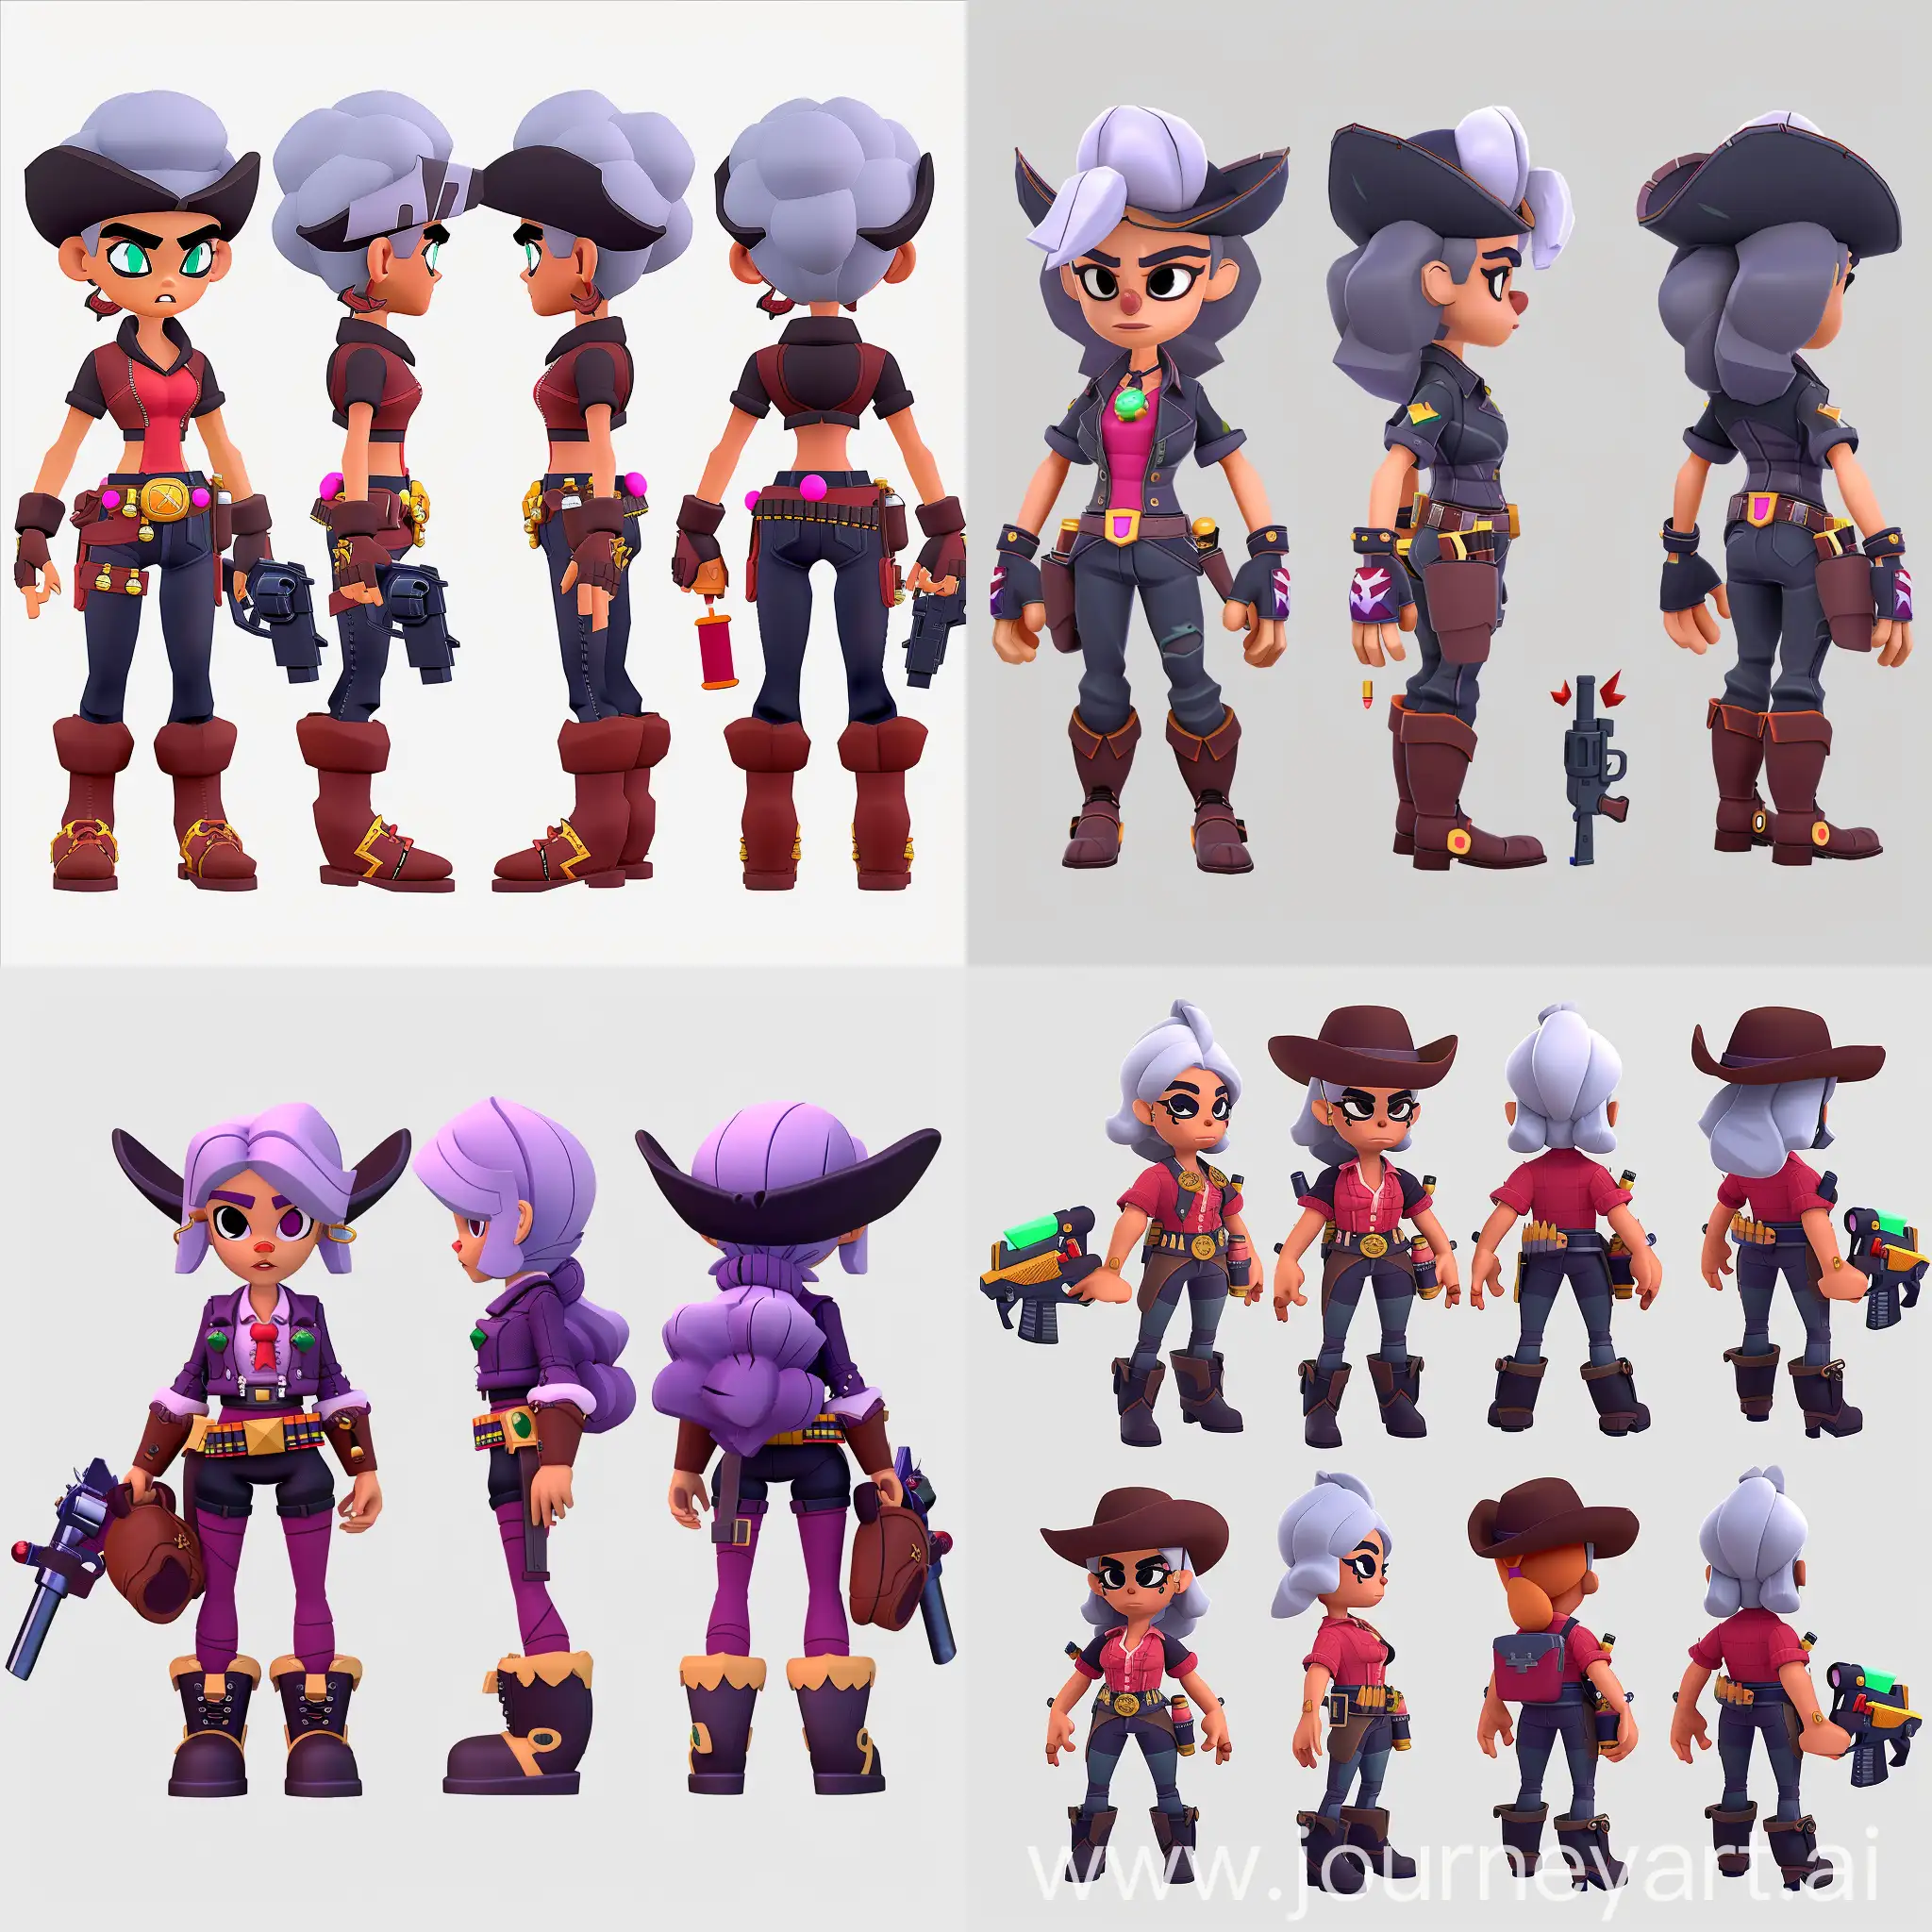 Evil-Cowgirl-Sharp-Shooter-Character-BrawlStars-Game-Character-Sheet-with-Multiple-Poses-and-Expressions